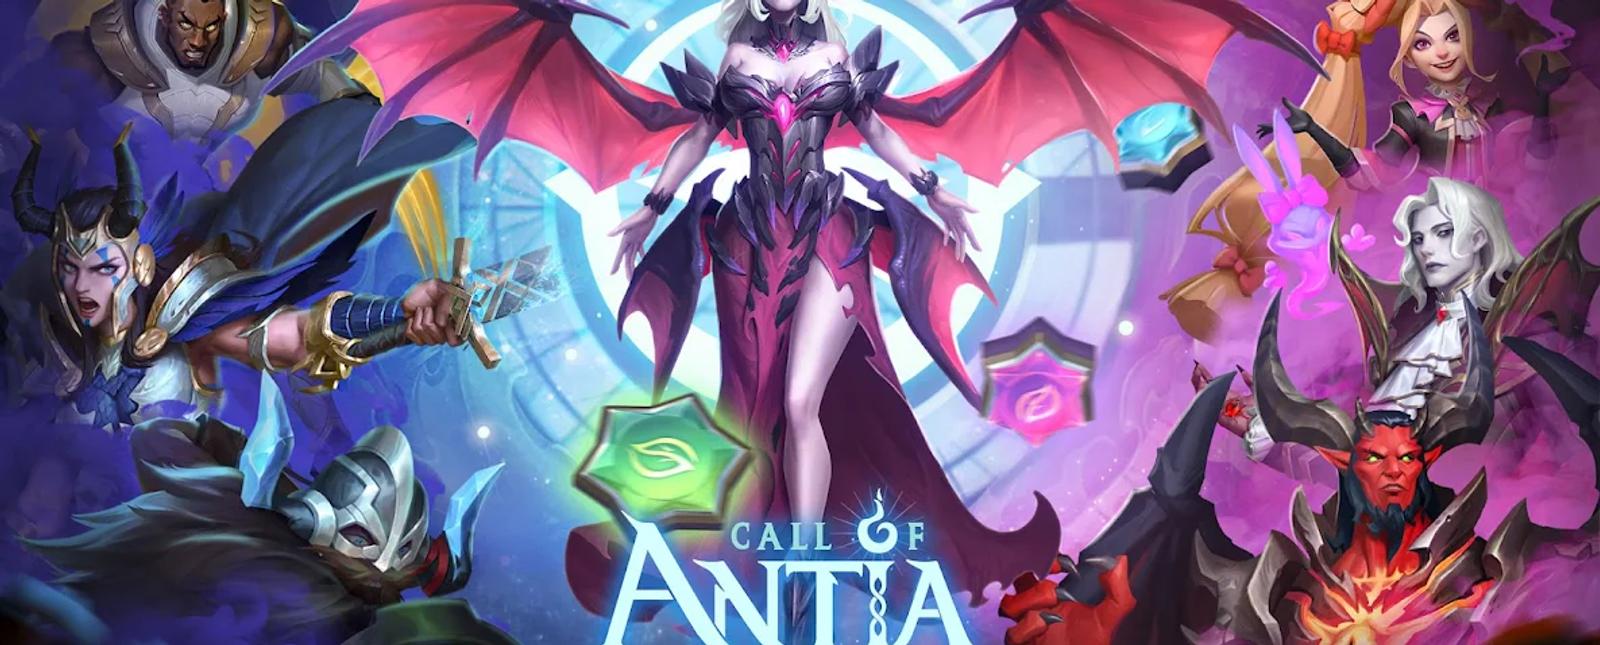 Artwork for Call of Antia featuring various in-game characters and heroes.